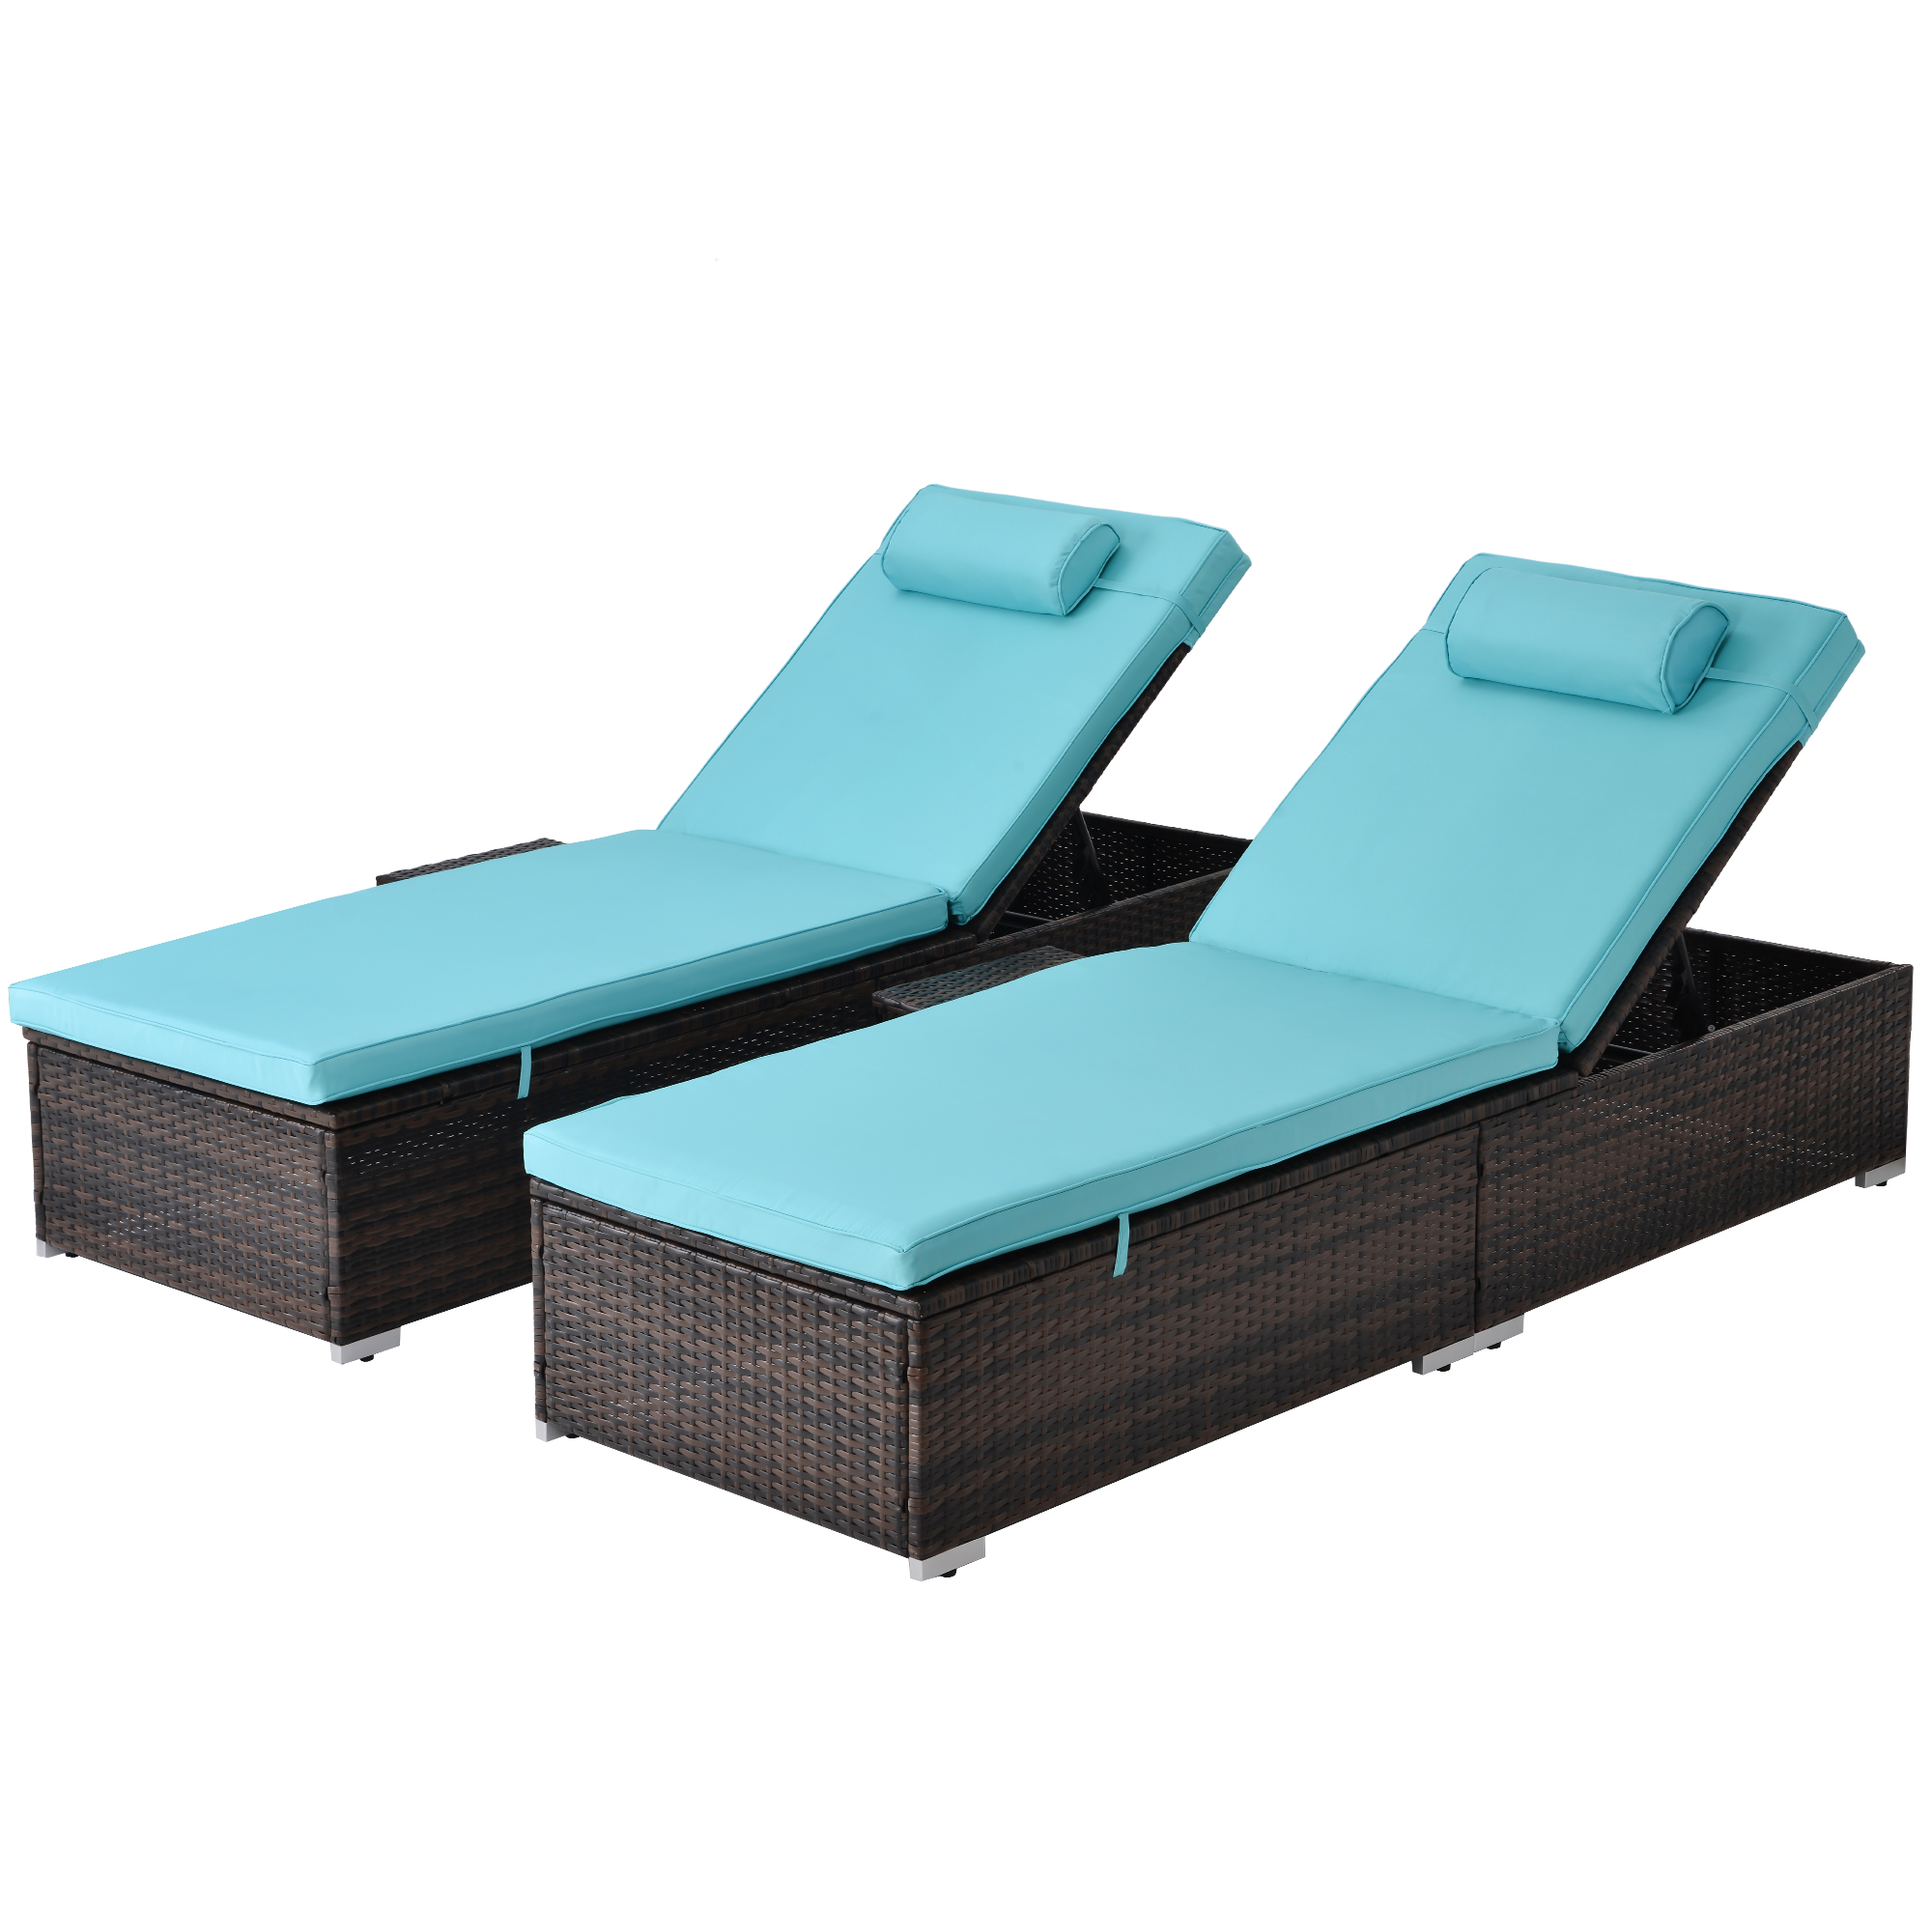 2 Piece Patio Chaise Lounge Furniture Set with Side Table, 5-Position Adjustable Cushioned Rattan Chaise Lounge with Head Pillow, PE Rattan Backrest Lounge Chairs Set for Pool Balcony Deck Yard, B68 - image 3 of 11